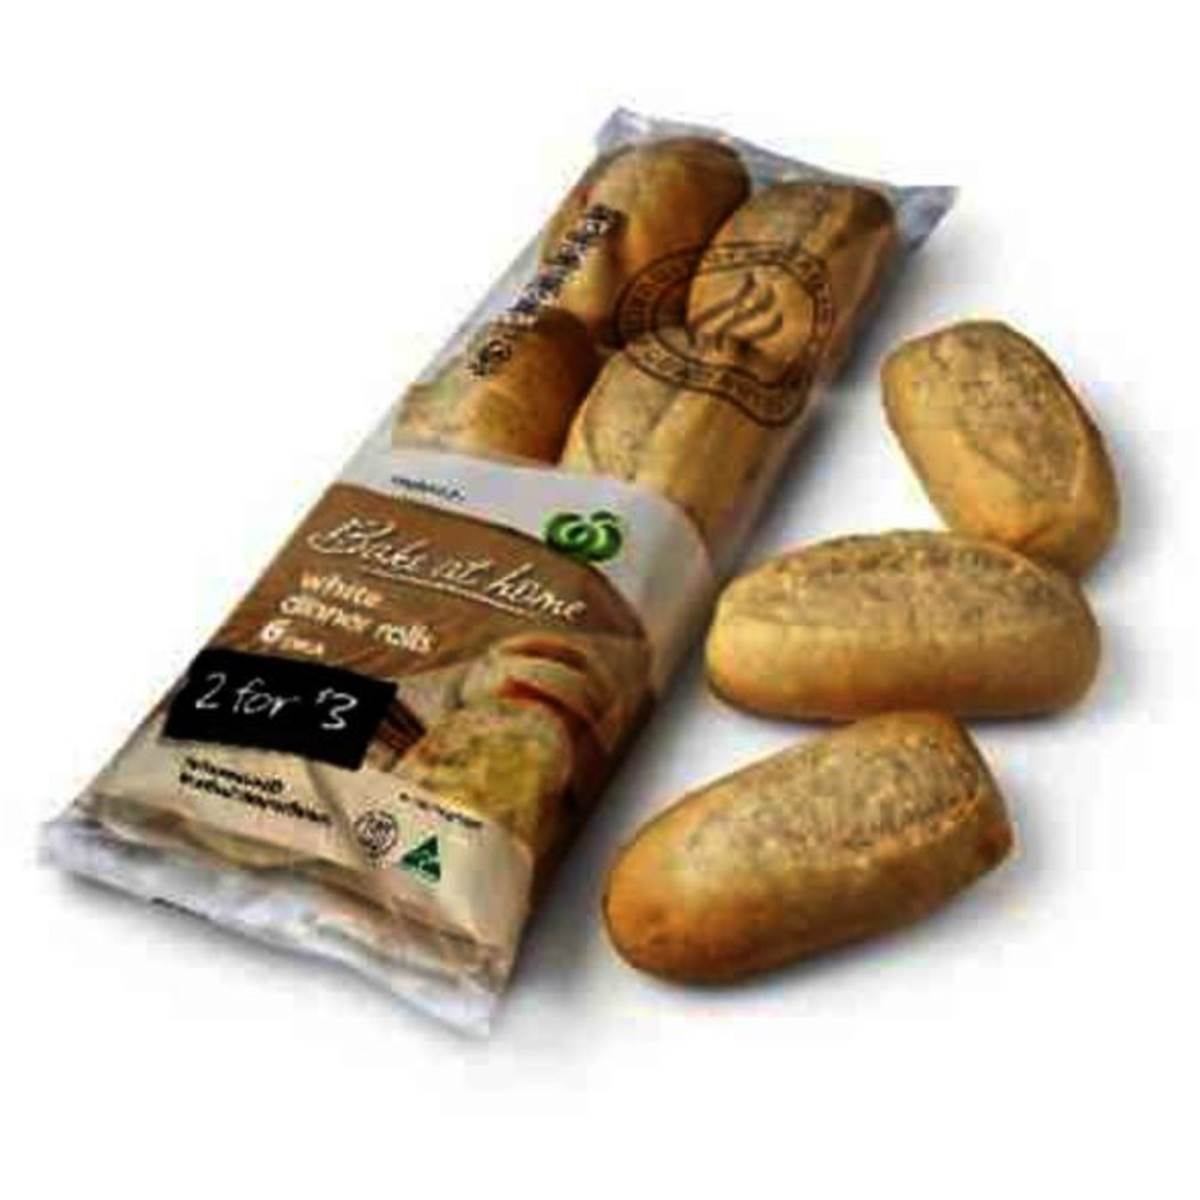 Woolworths Bake At Home Bread Rolls White Dinner